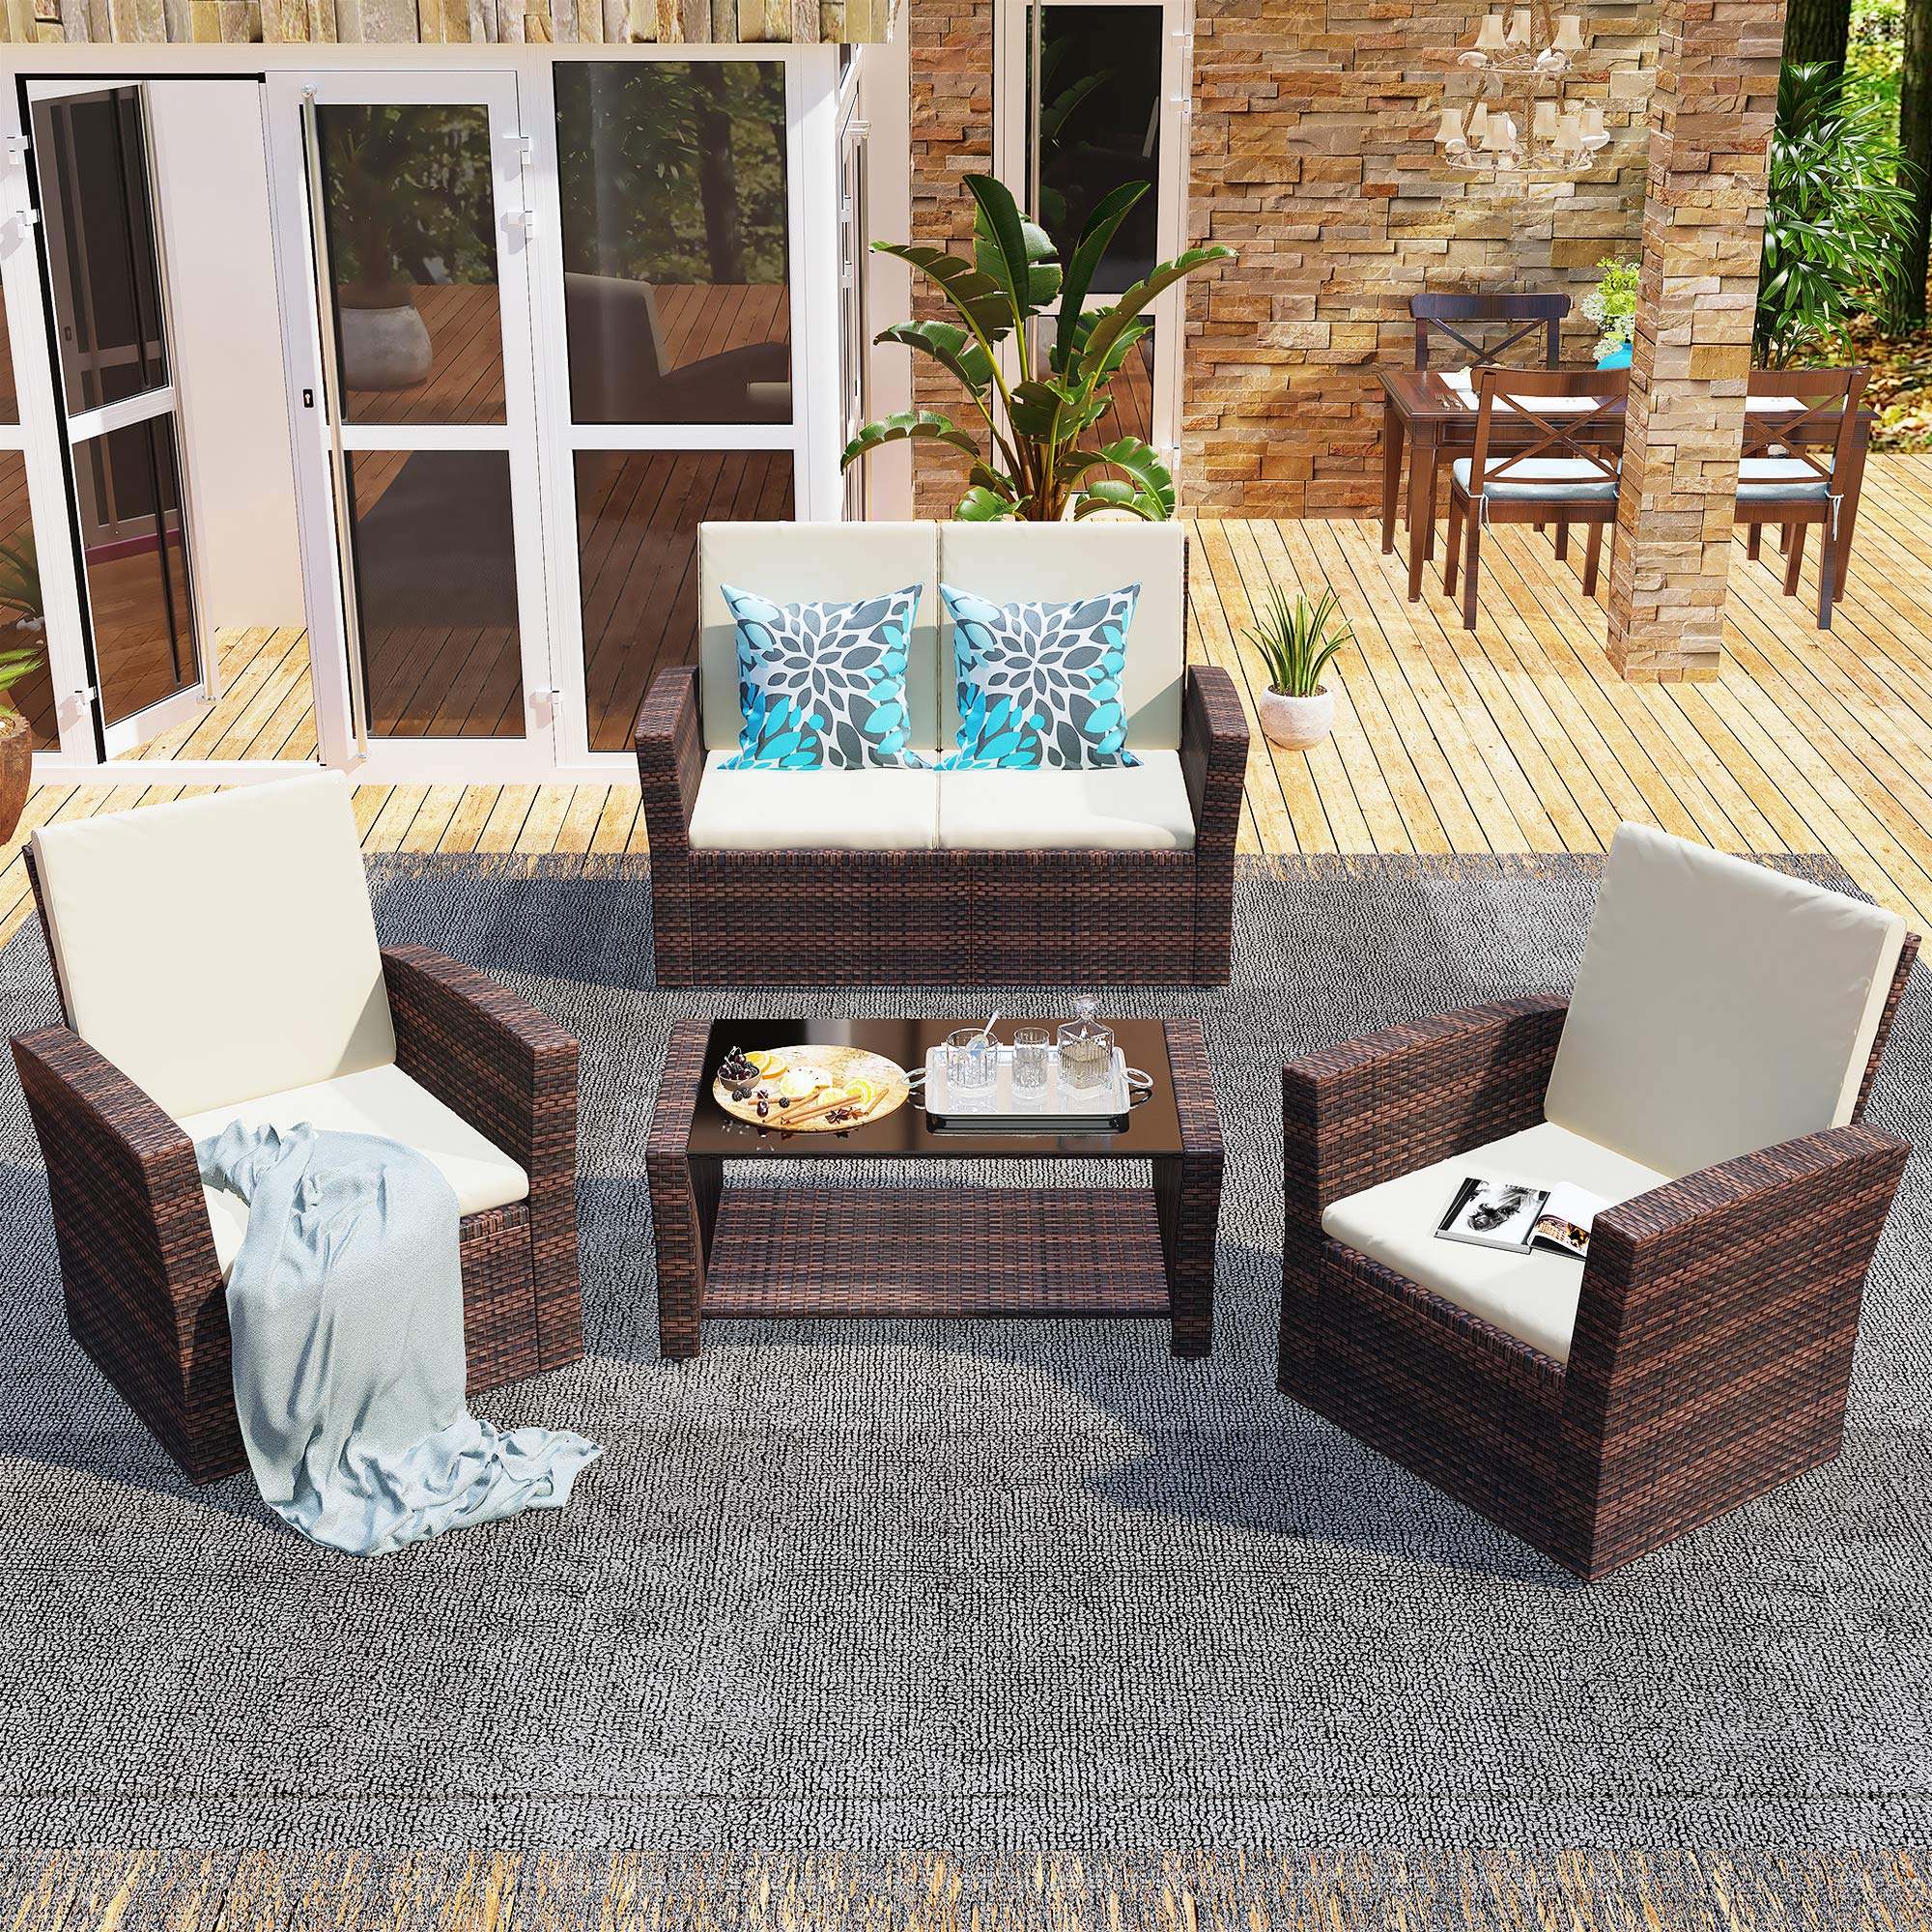 Yitahome 5 Piece Patio Furniture Sets All Weather Outdoor Conversation Set Pe Rattan Wicker Small Sectional Sofa With Table Brown Garden Season - Patio Sectional Sets With Table